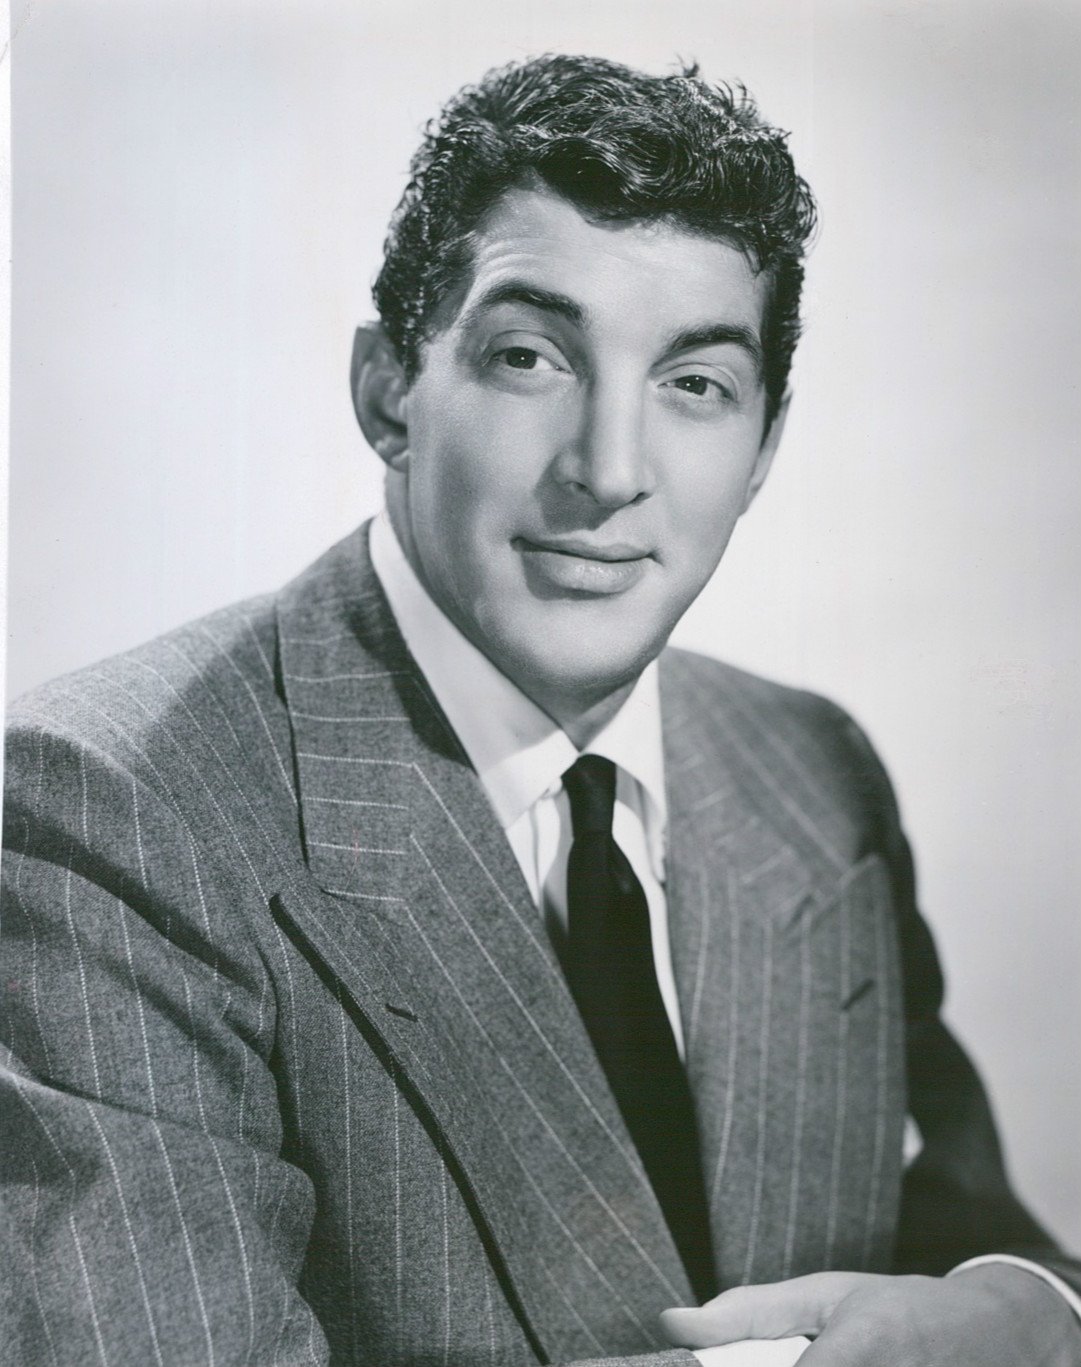 Photo of Dean Martin as he began an NBC show with Jerry Lewis, circa 1948. | Photo: Wikimedia Commons